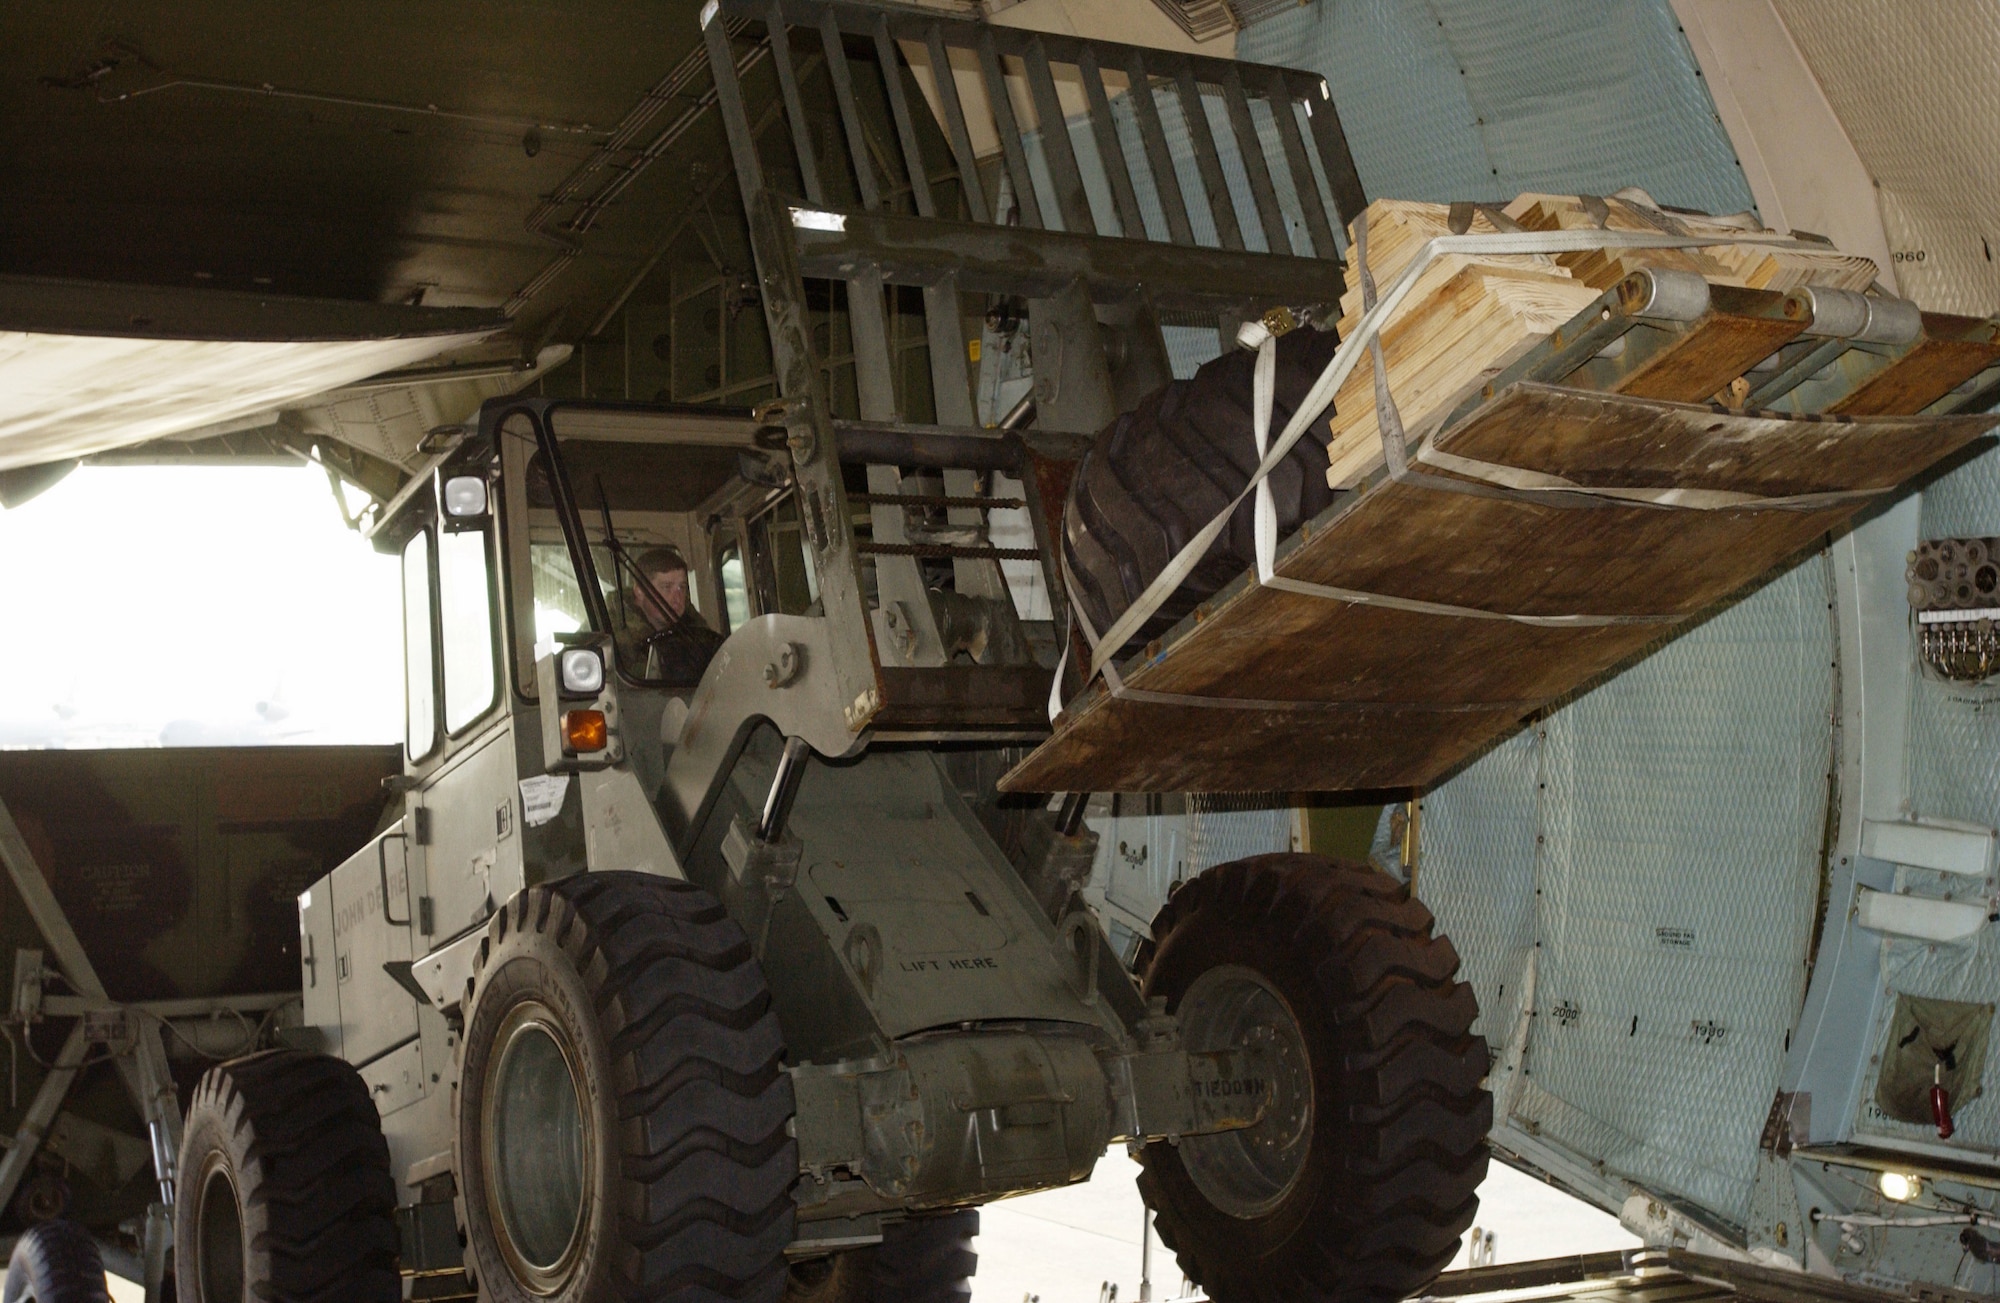 US Air Force (USAF) Airmen from the 621st Air Mobility Operations Group (AMOG), McGuire Air Force Base (AFB), New Jersey (NJ), load cargo with a John Deere 544E10K Advance Terrain forklift into a C-5 Galaxy in preparation for deployment in support of Operation ENDURING FREEDOM.